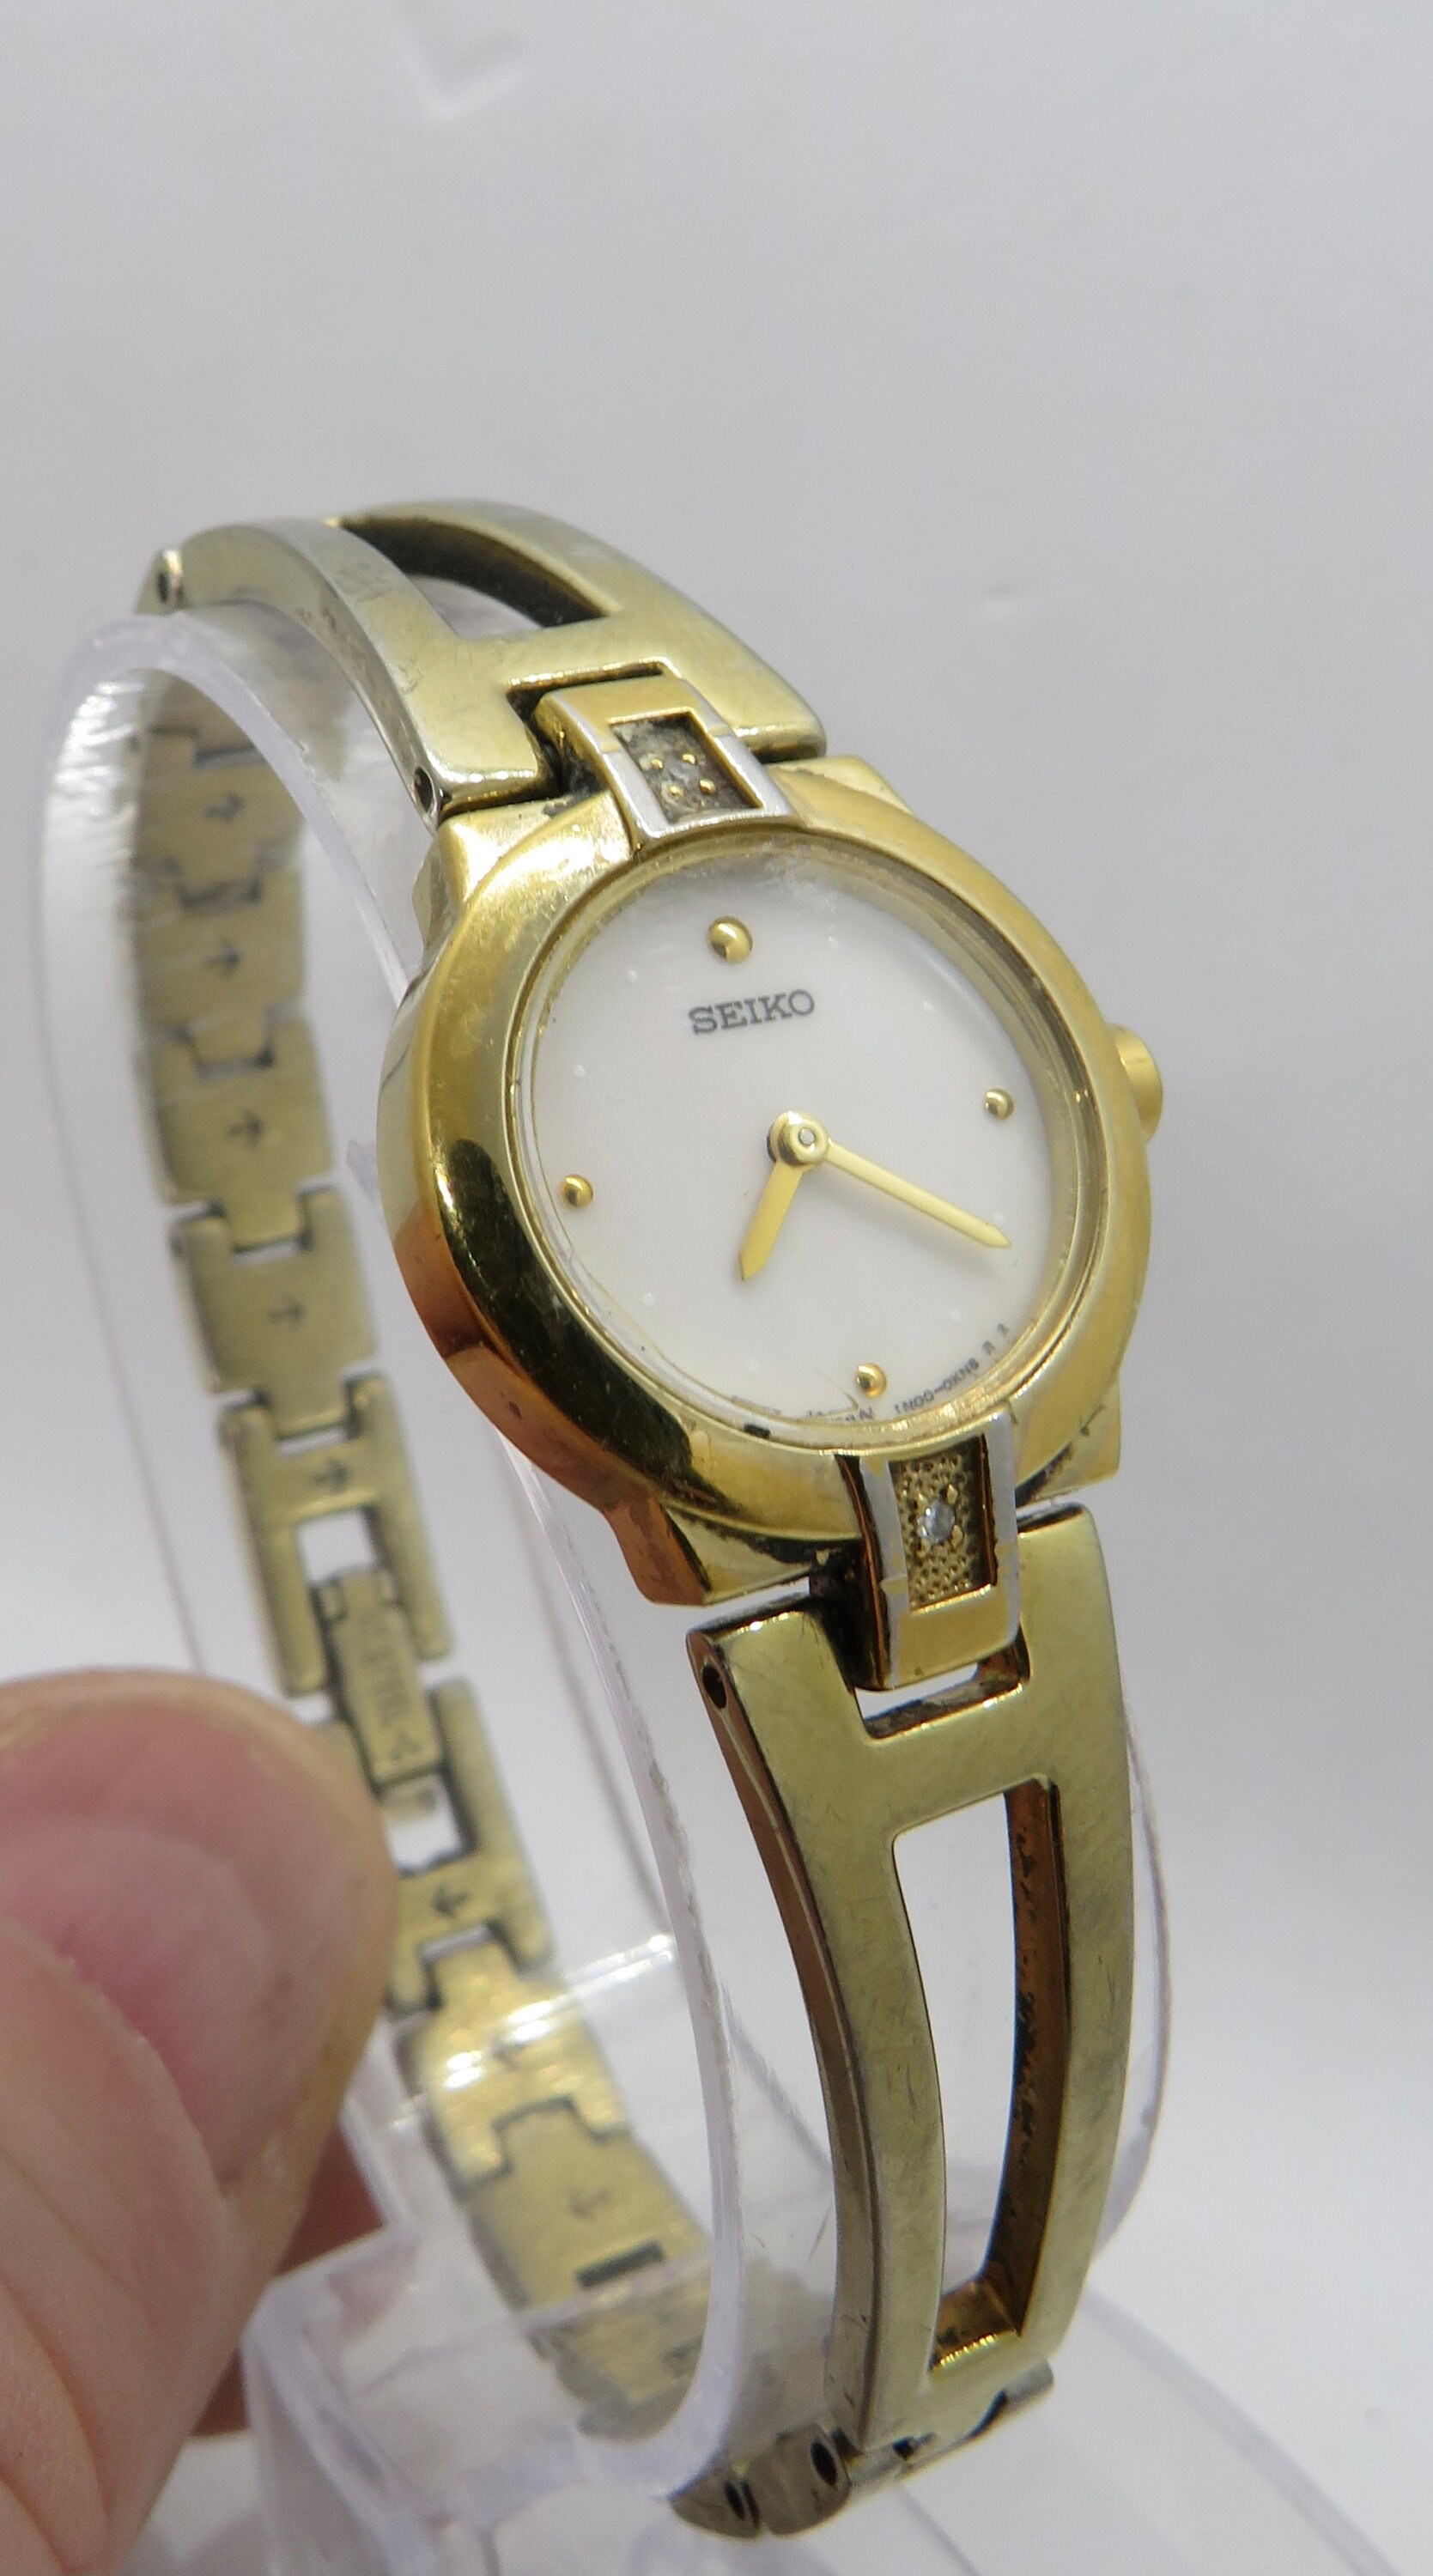 Vintage Watch Seiko / Classic Womens Watch / Watch / Vintage - Etsy